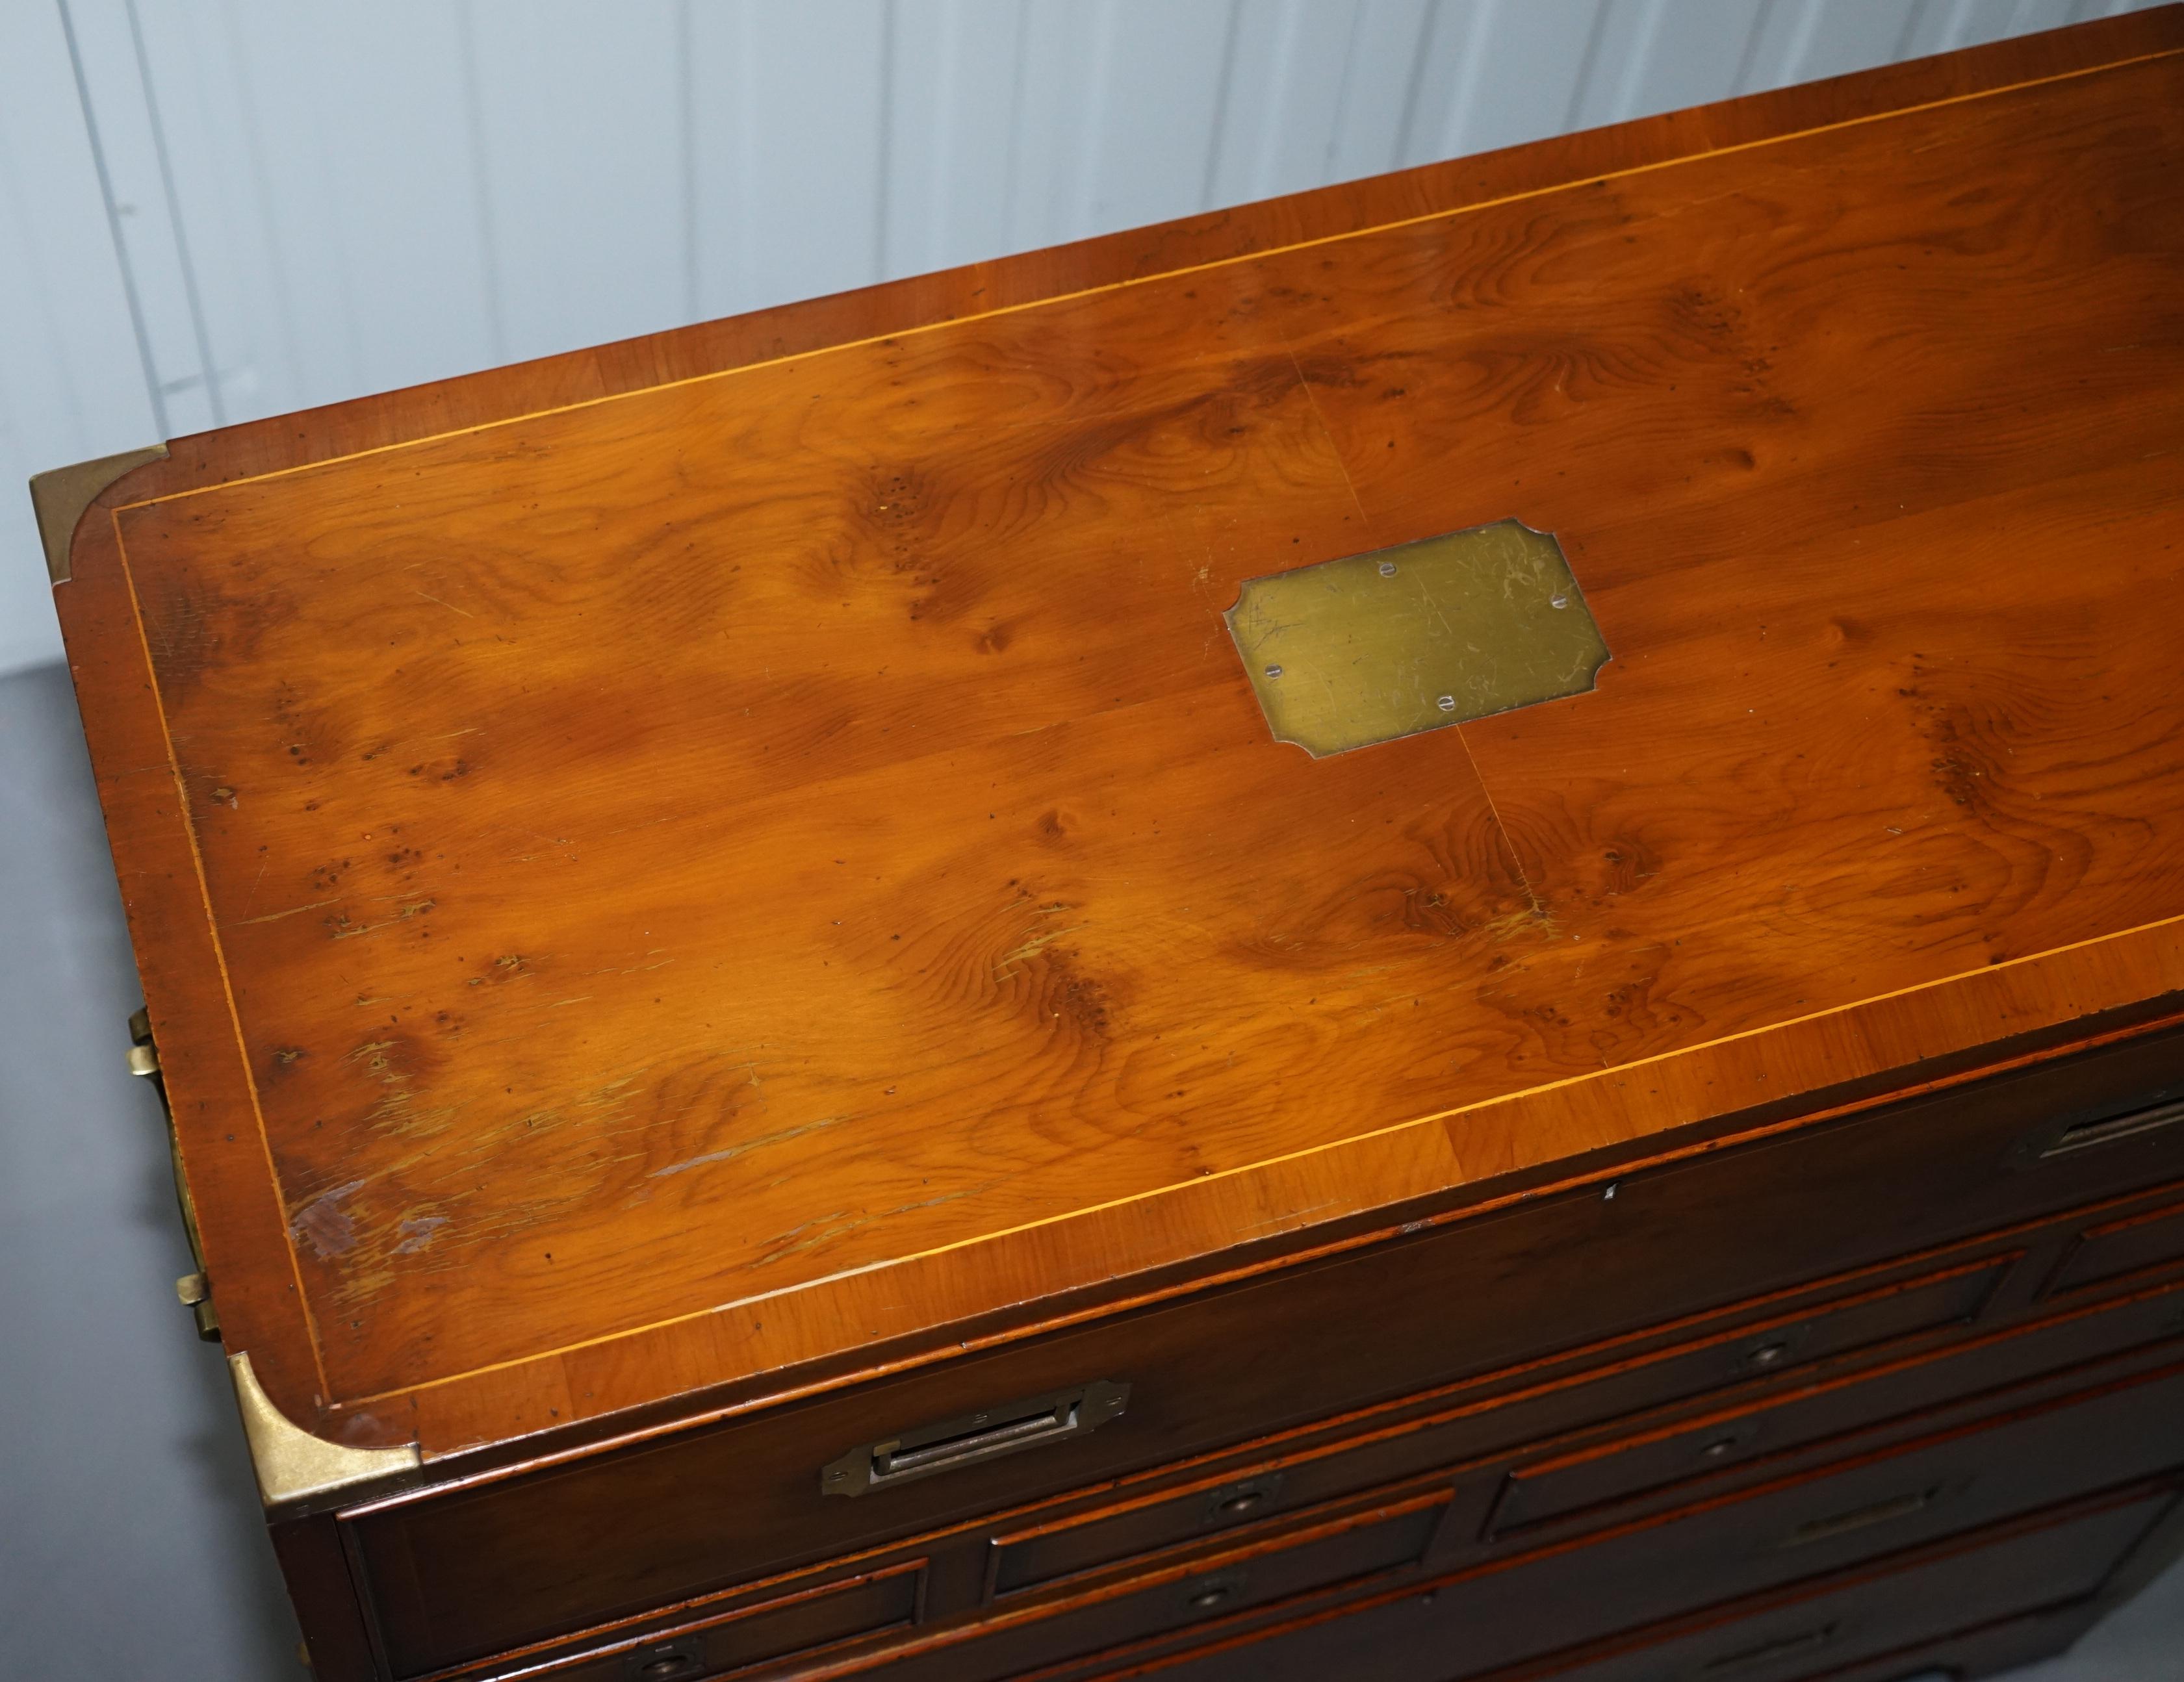 Hand-Crafted Lovely Burr Yew Wood Military Campaign Chest of Drawers Built in Drop Front Desk